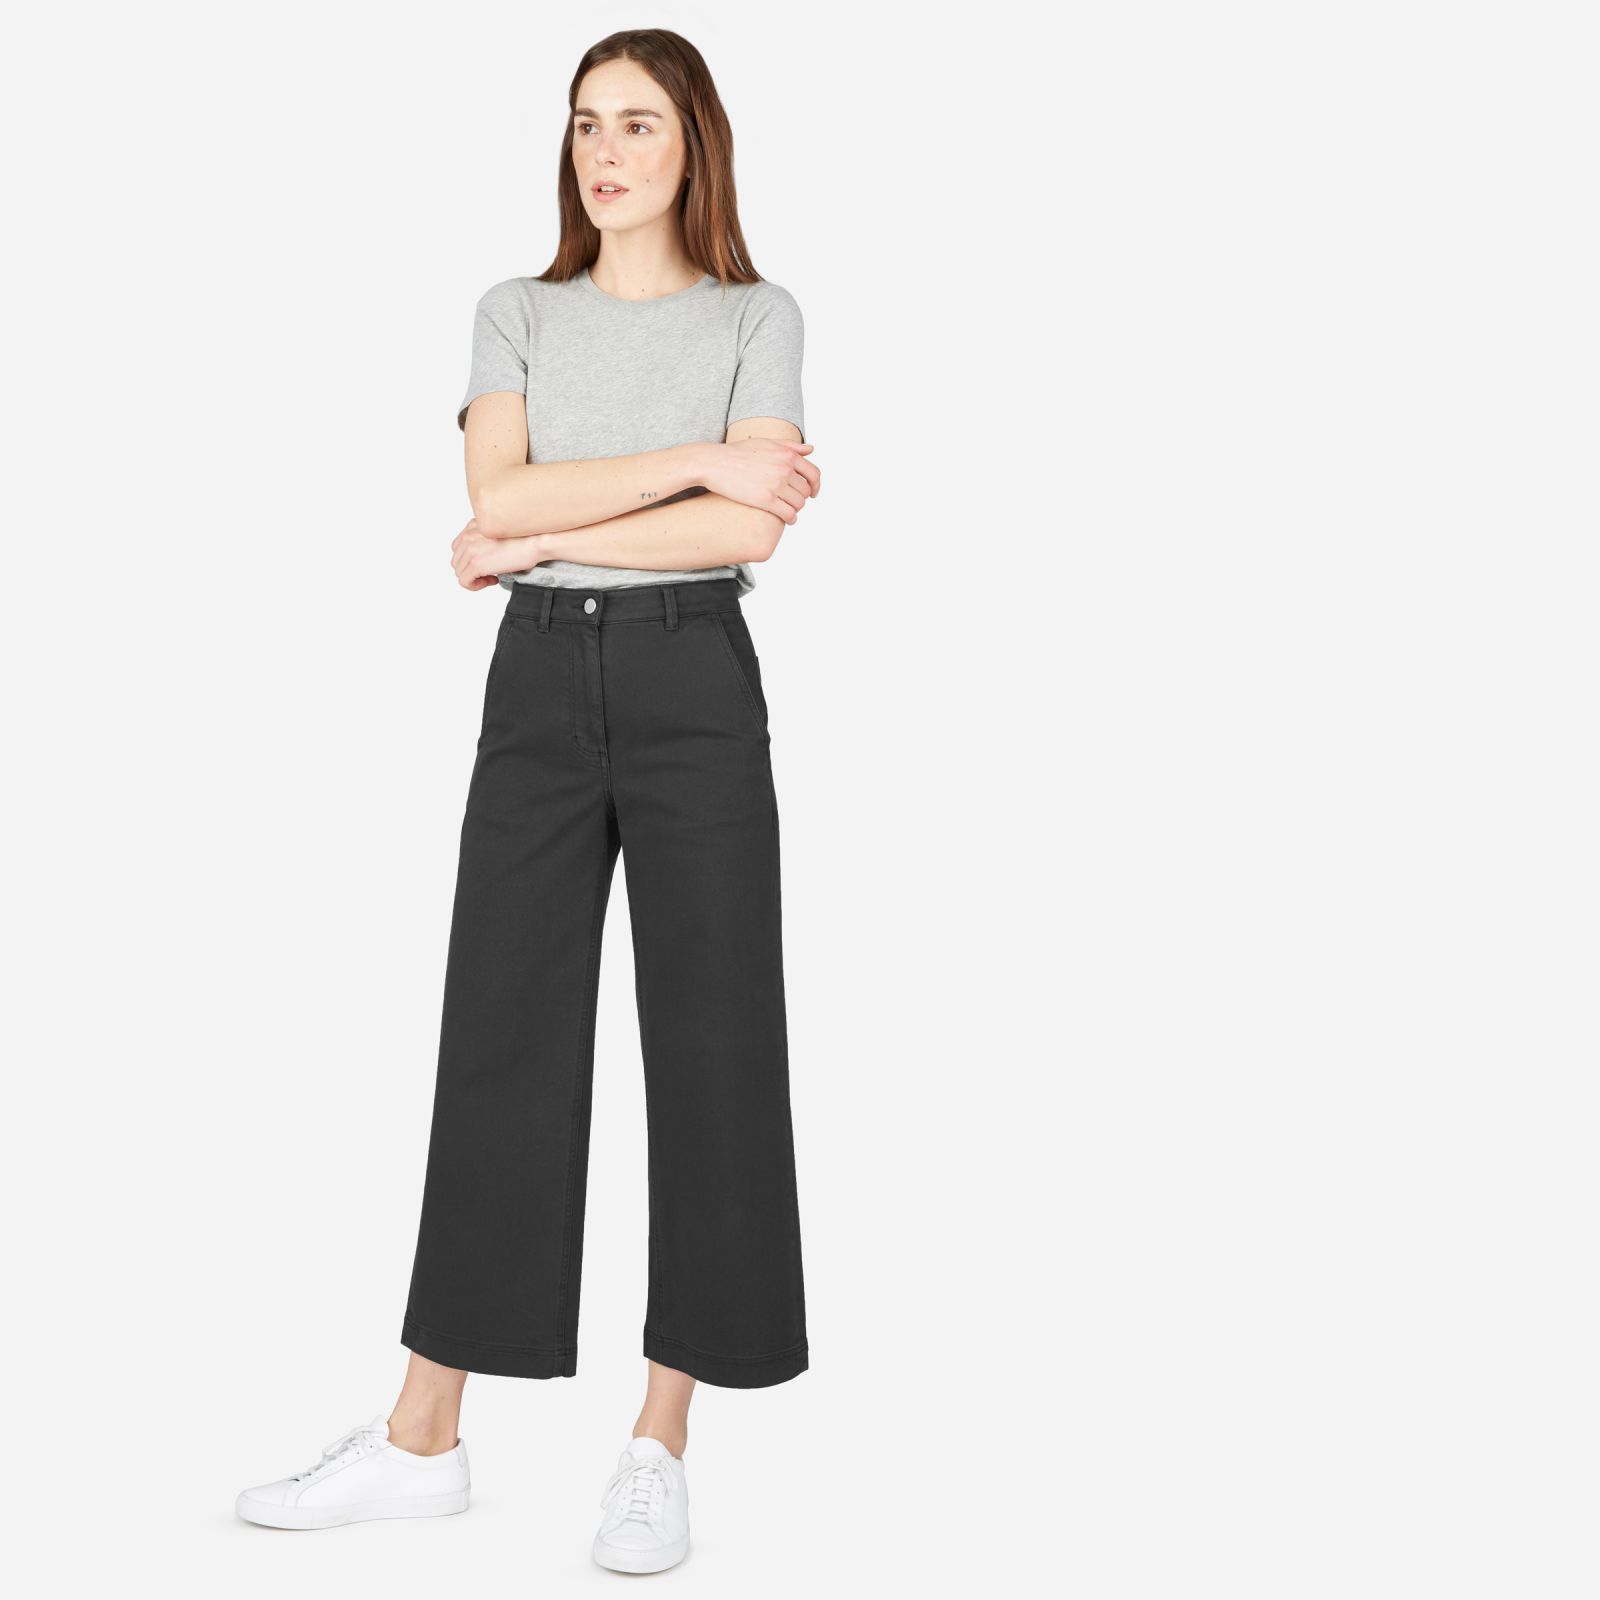 Women's Wide Leg Crop Pant by Everlane in Black, Size 00 | Everlane